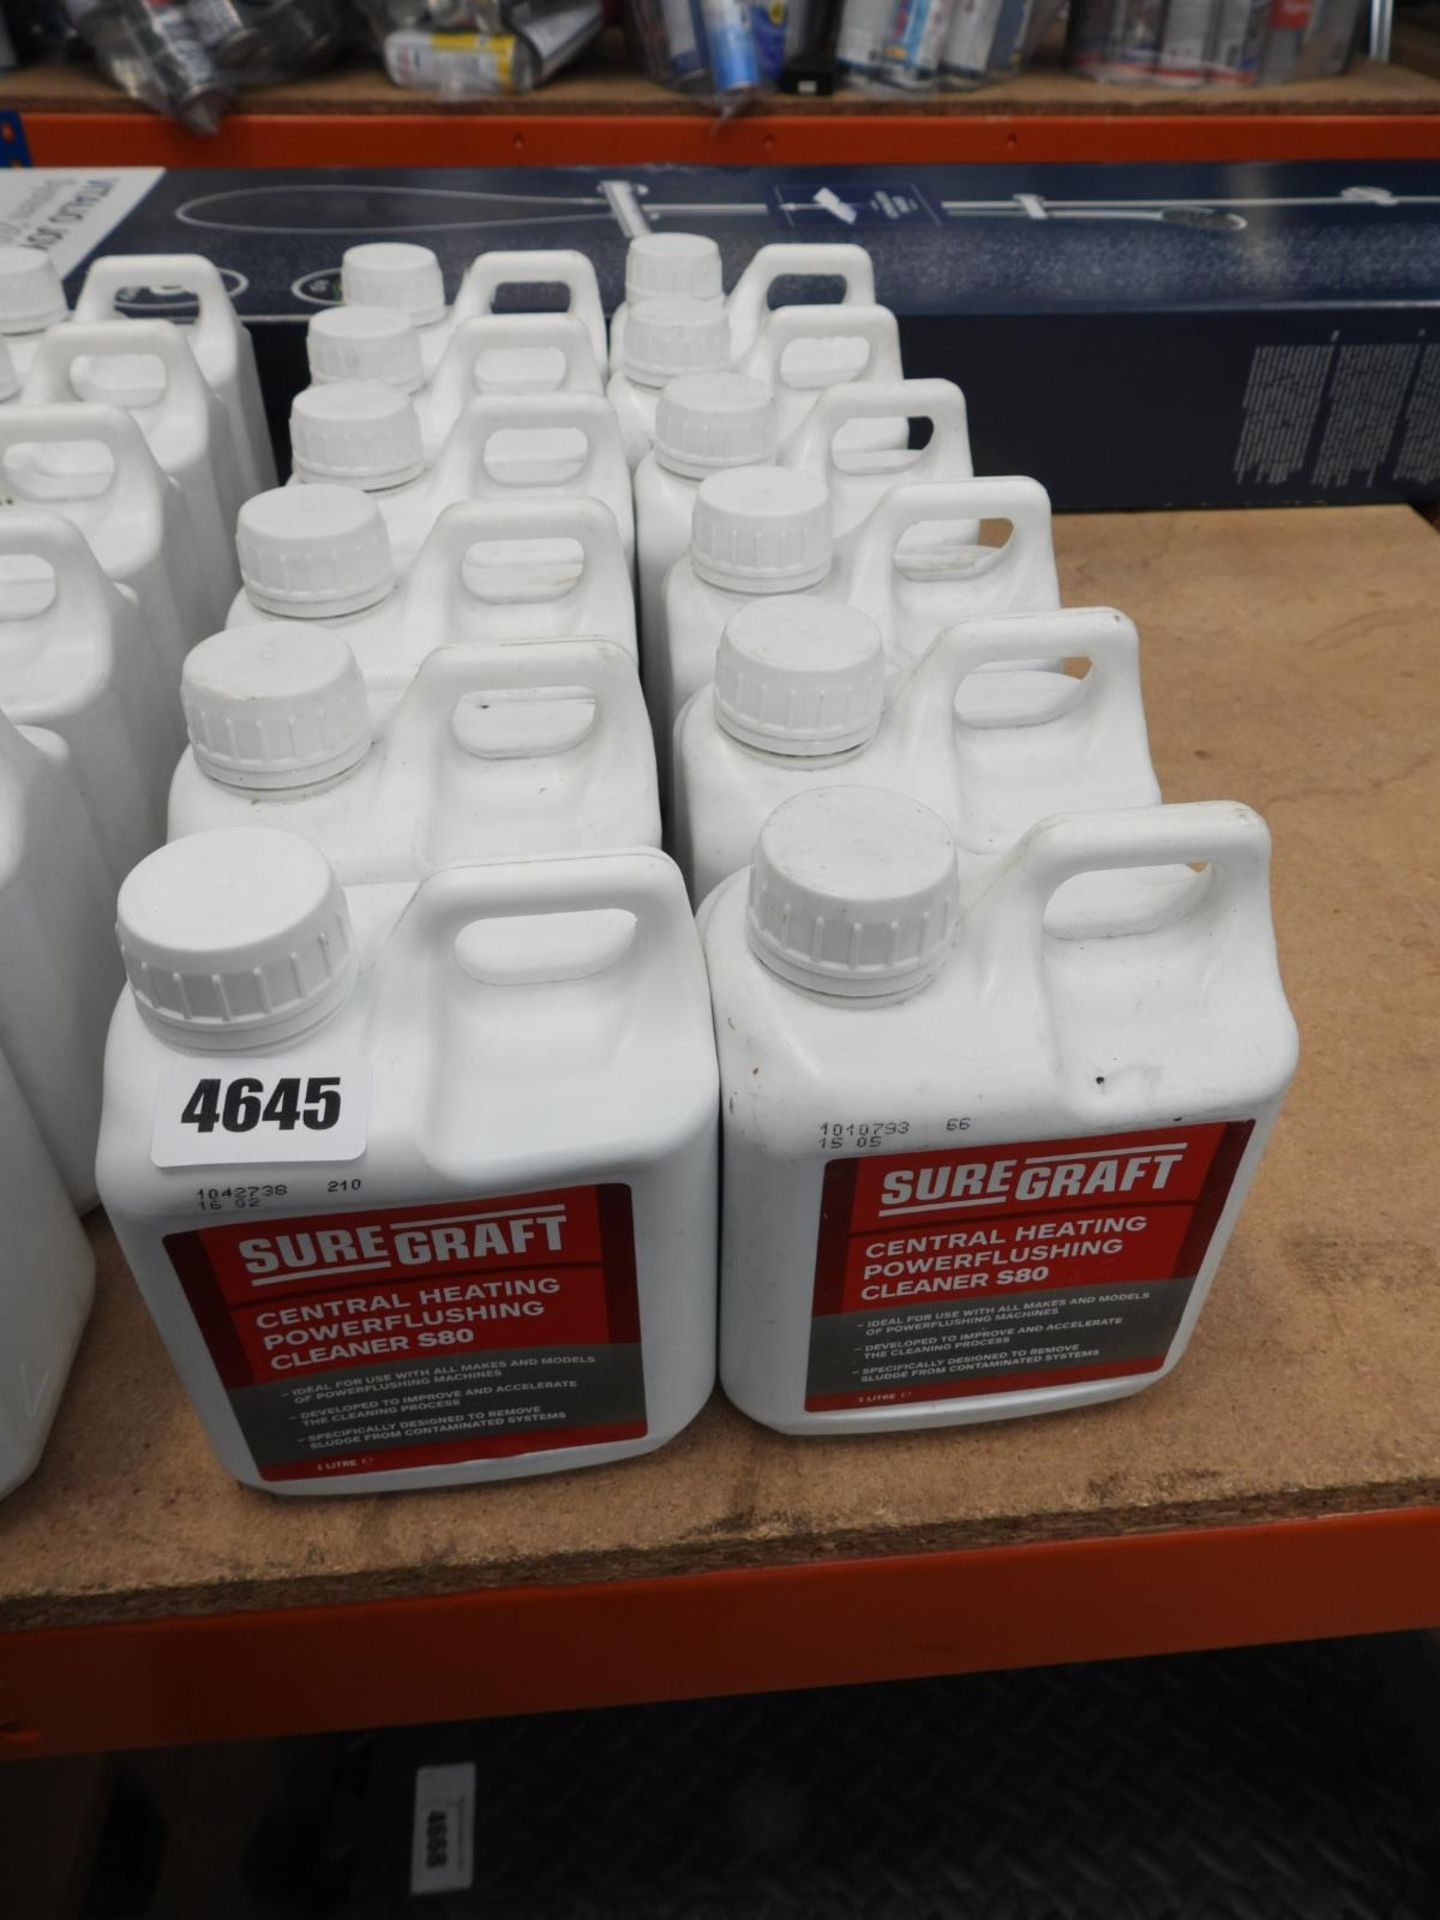 12 tubs of suregraft central heating power flushing cleaner